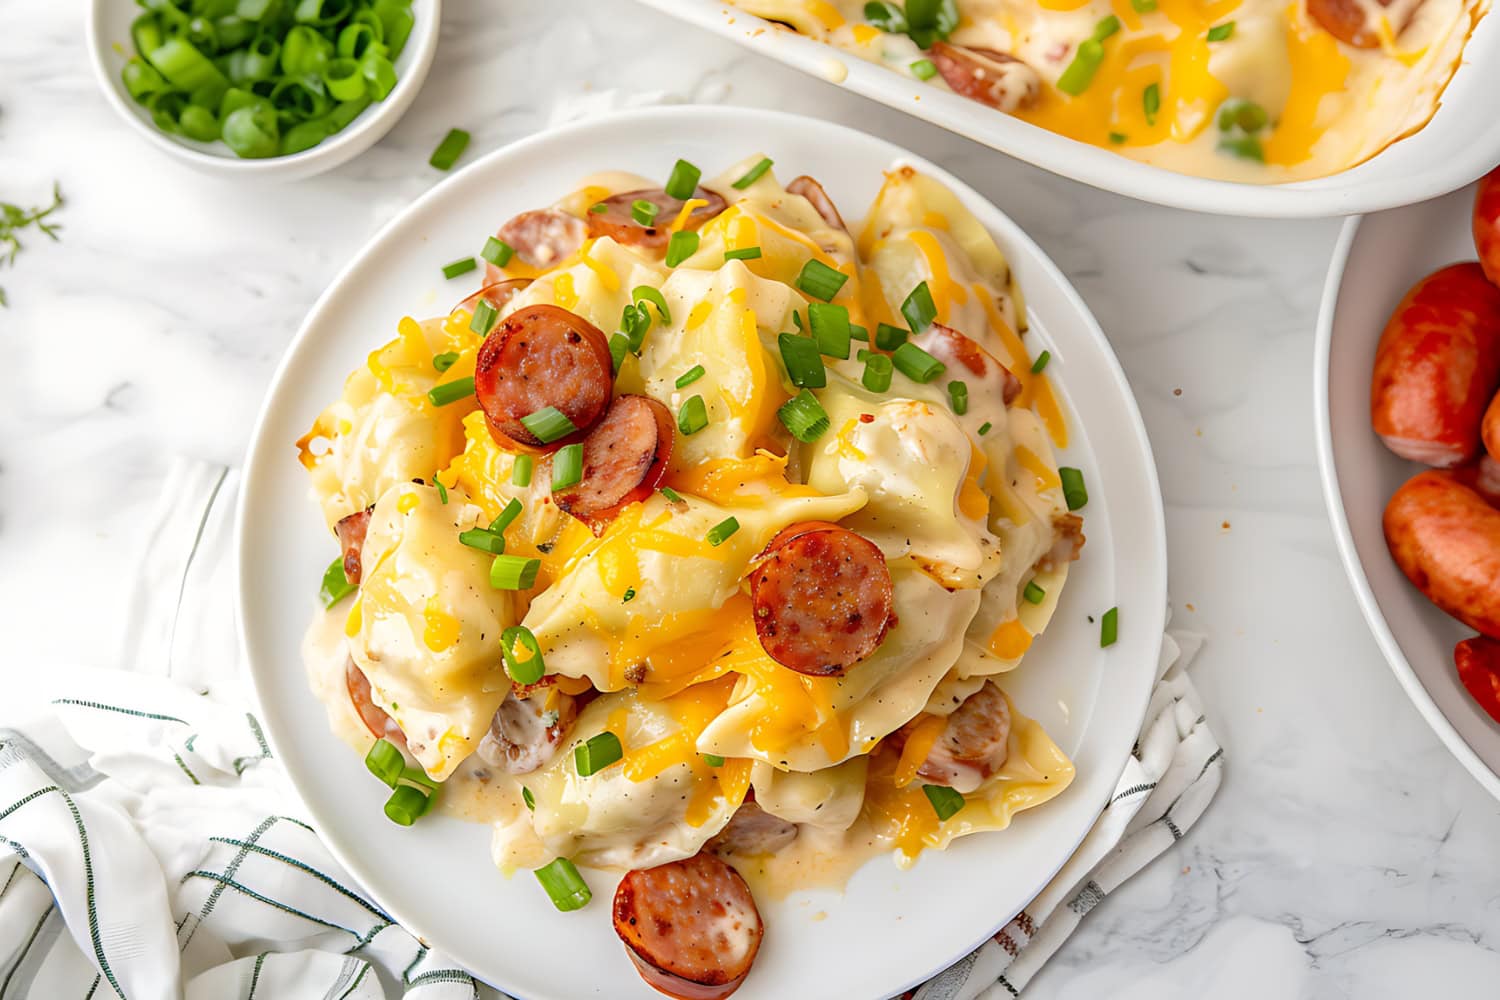 Pierogi casserole with sliced kielbesa sausage and melted cheese served in a white plate.